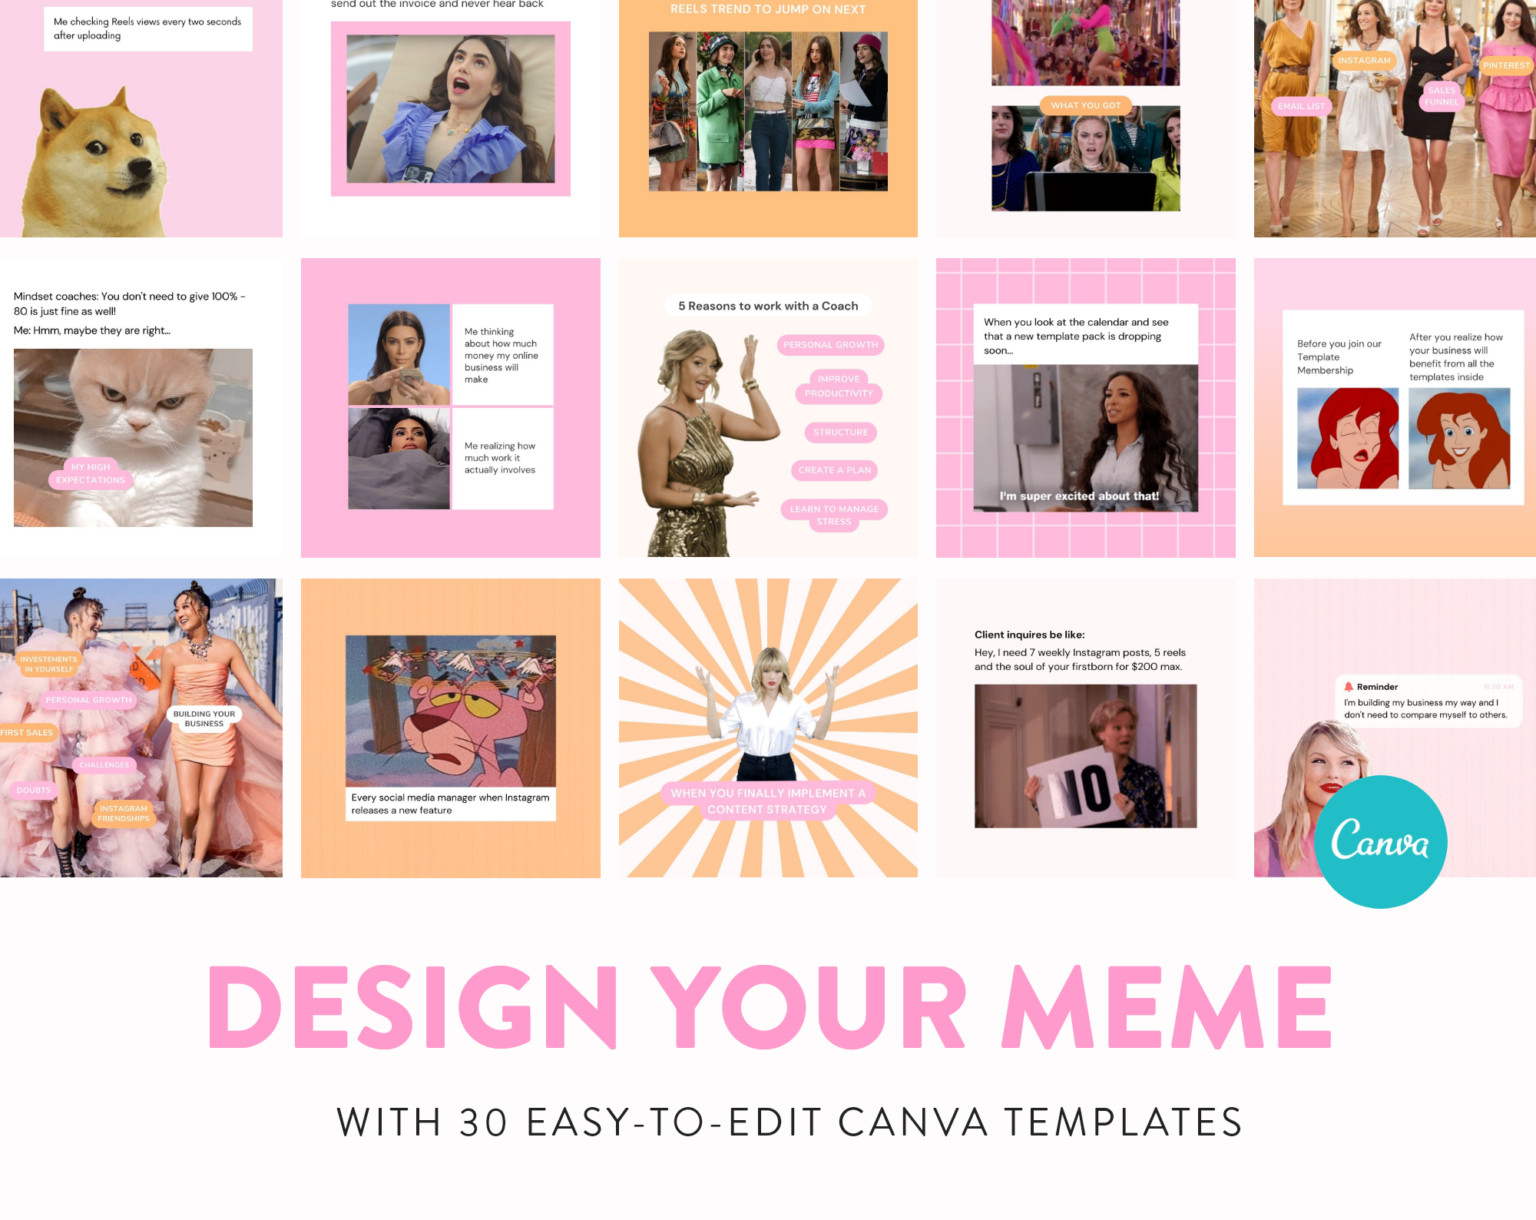 memes-gifs-Instagram-feed-post-templates-canva-design-overview-2-2